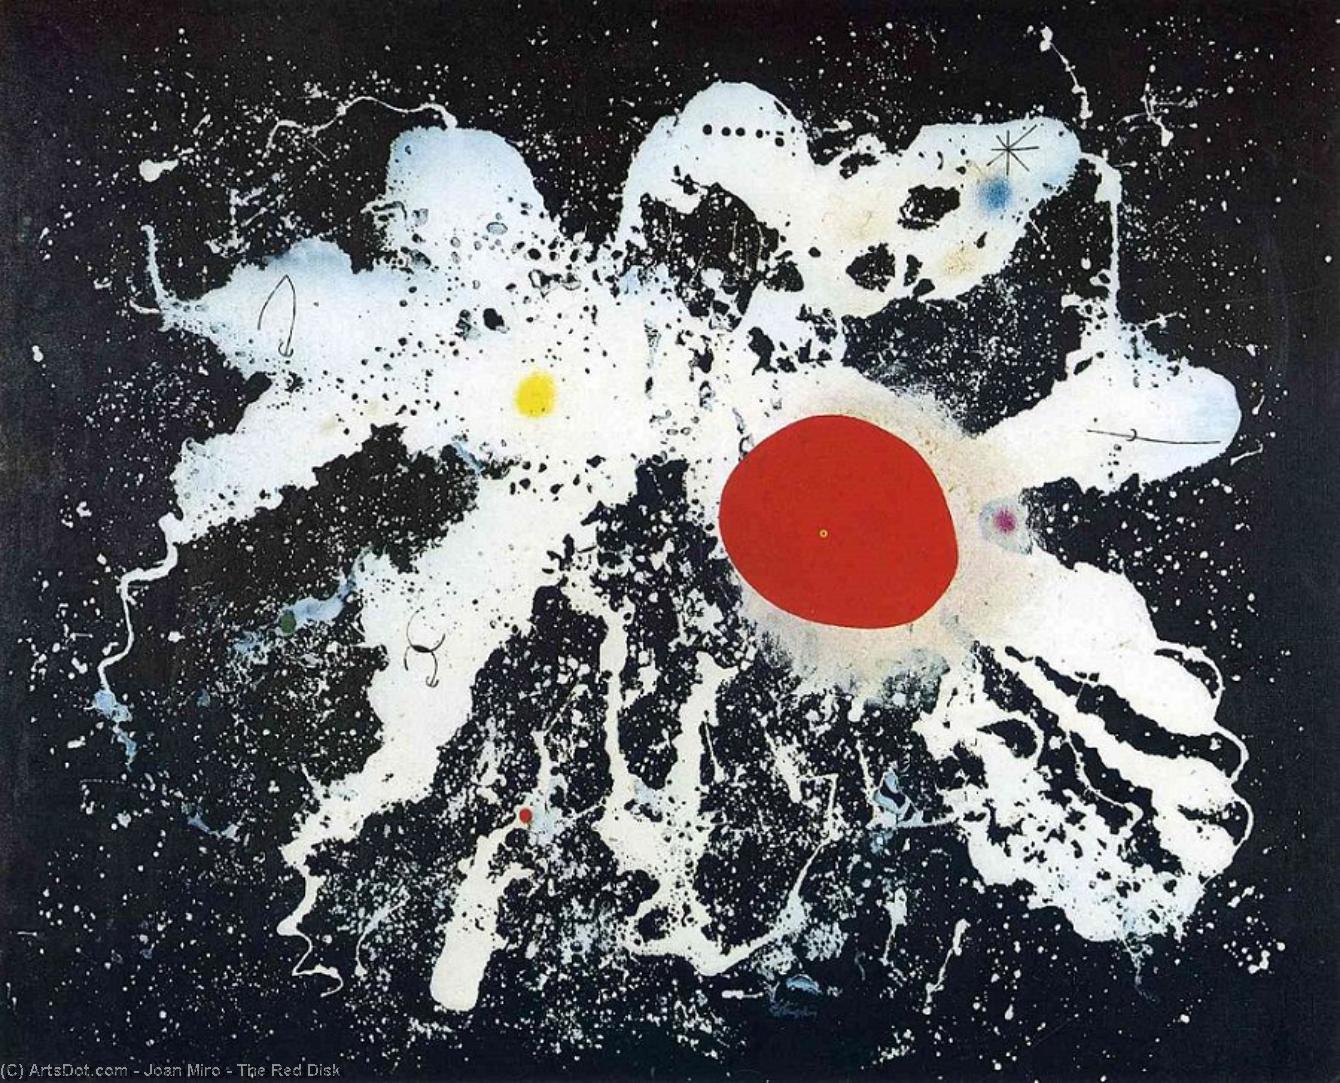 Order Oil Painting Replica The Red Disk, 1960 by Joan Miro (Inspired By) (1893-1983, Spain) | ArtsDot.com